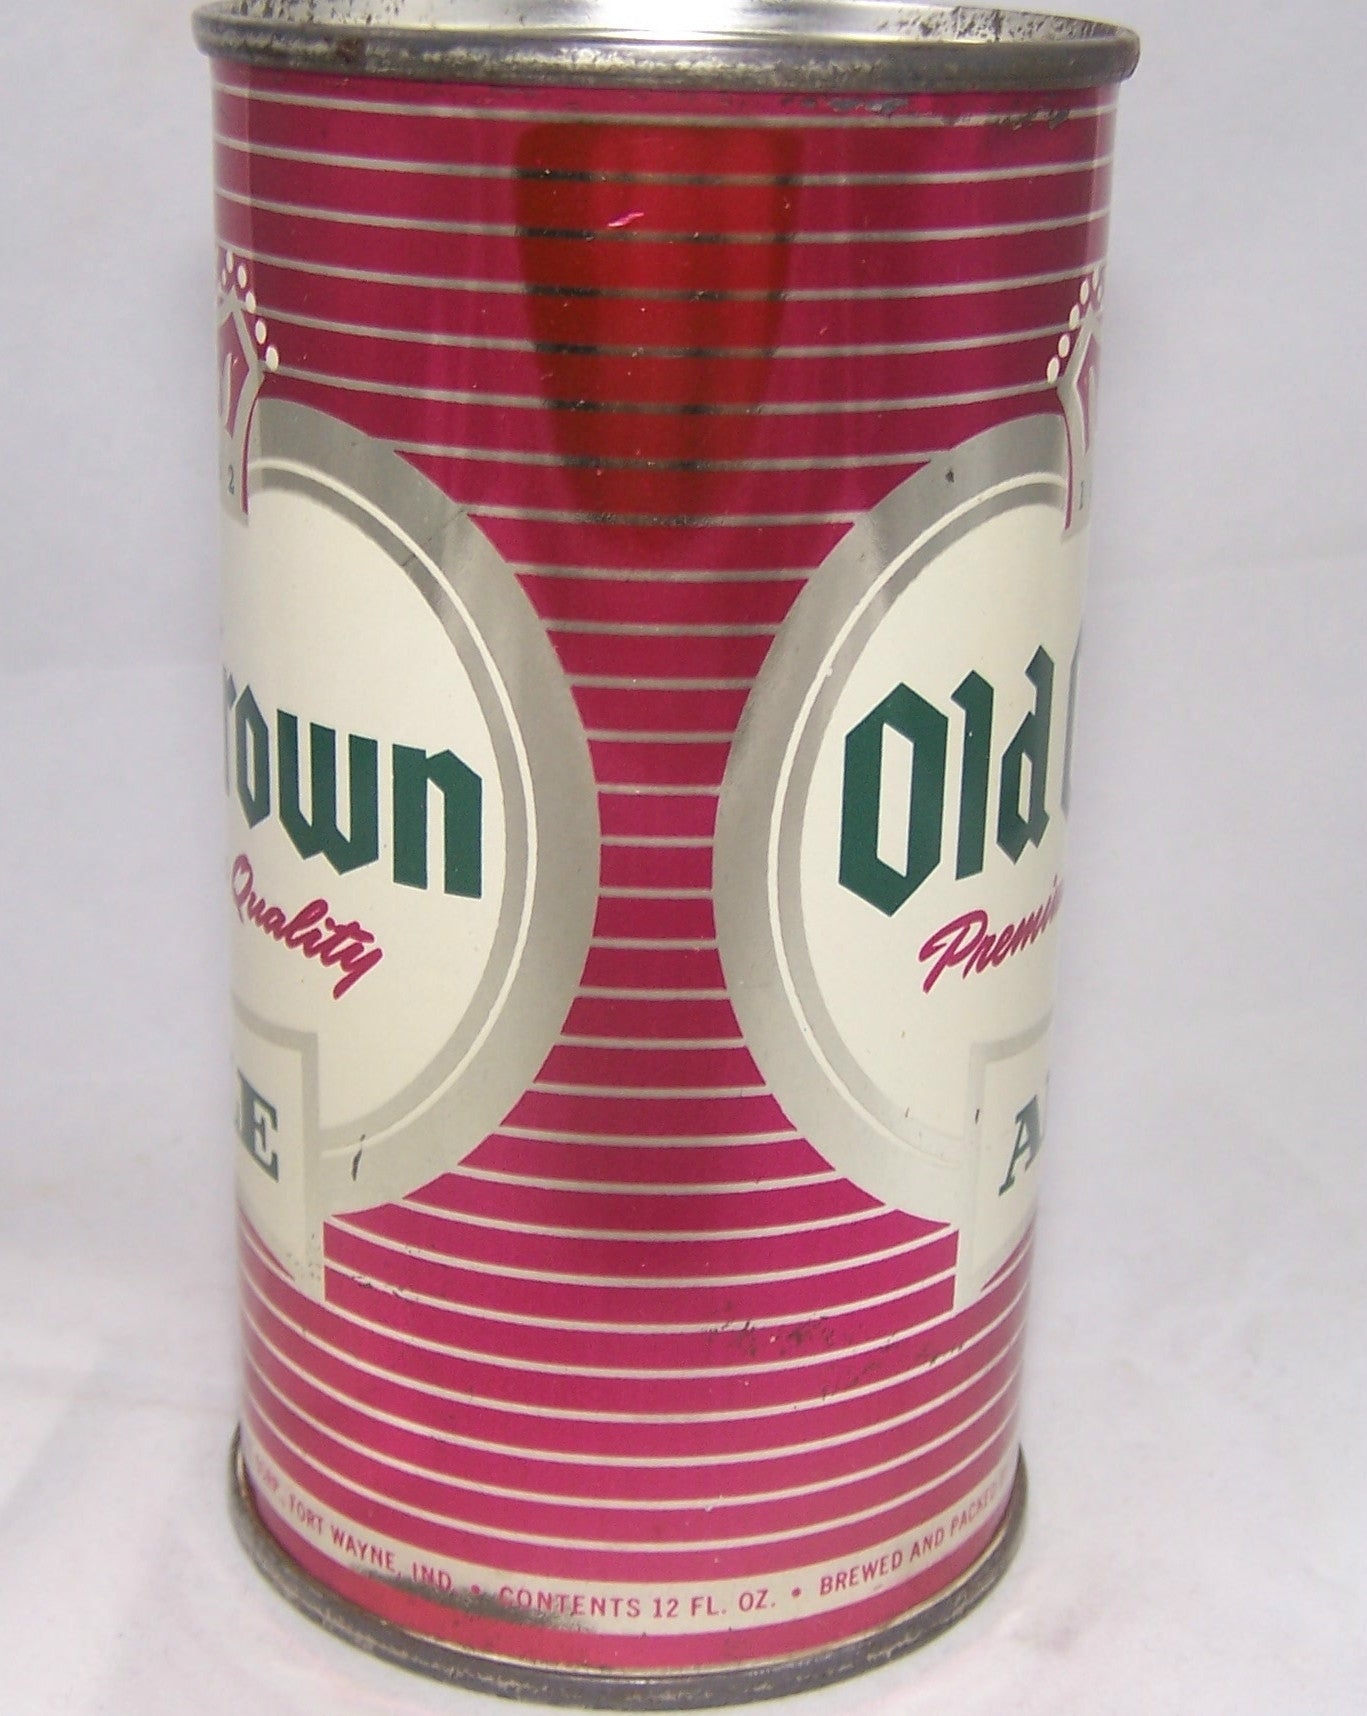 Old Crown Ale set can (Pink) USBC 105-11, Grade 1/1+ SOLD ON 09/23/16